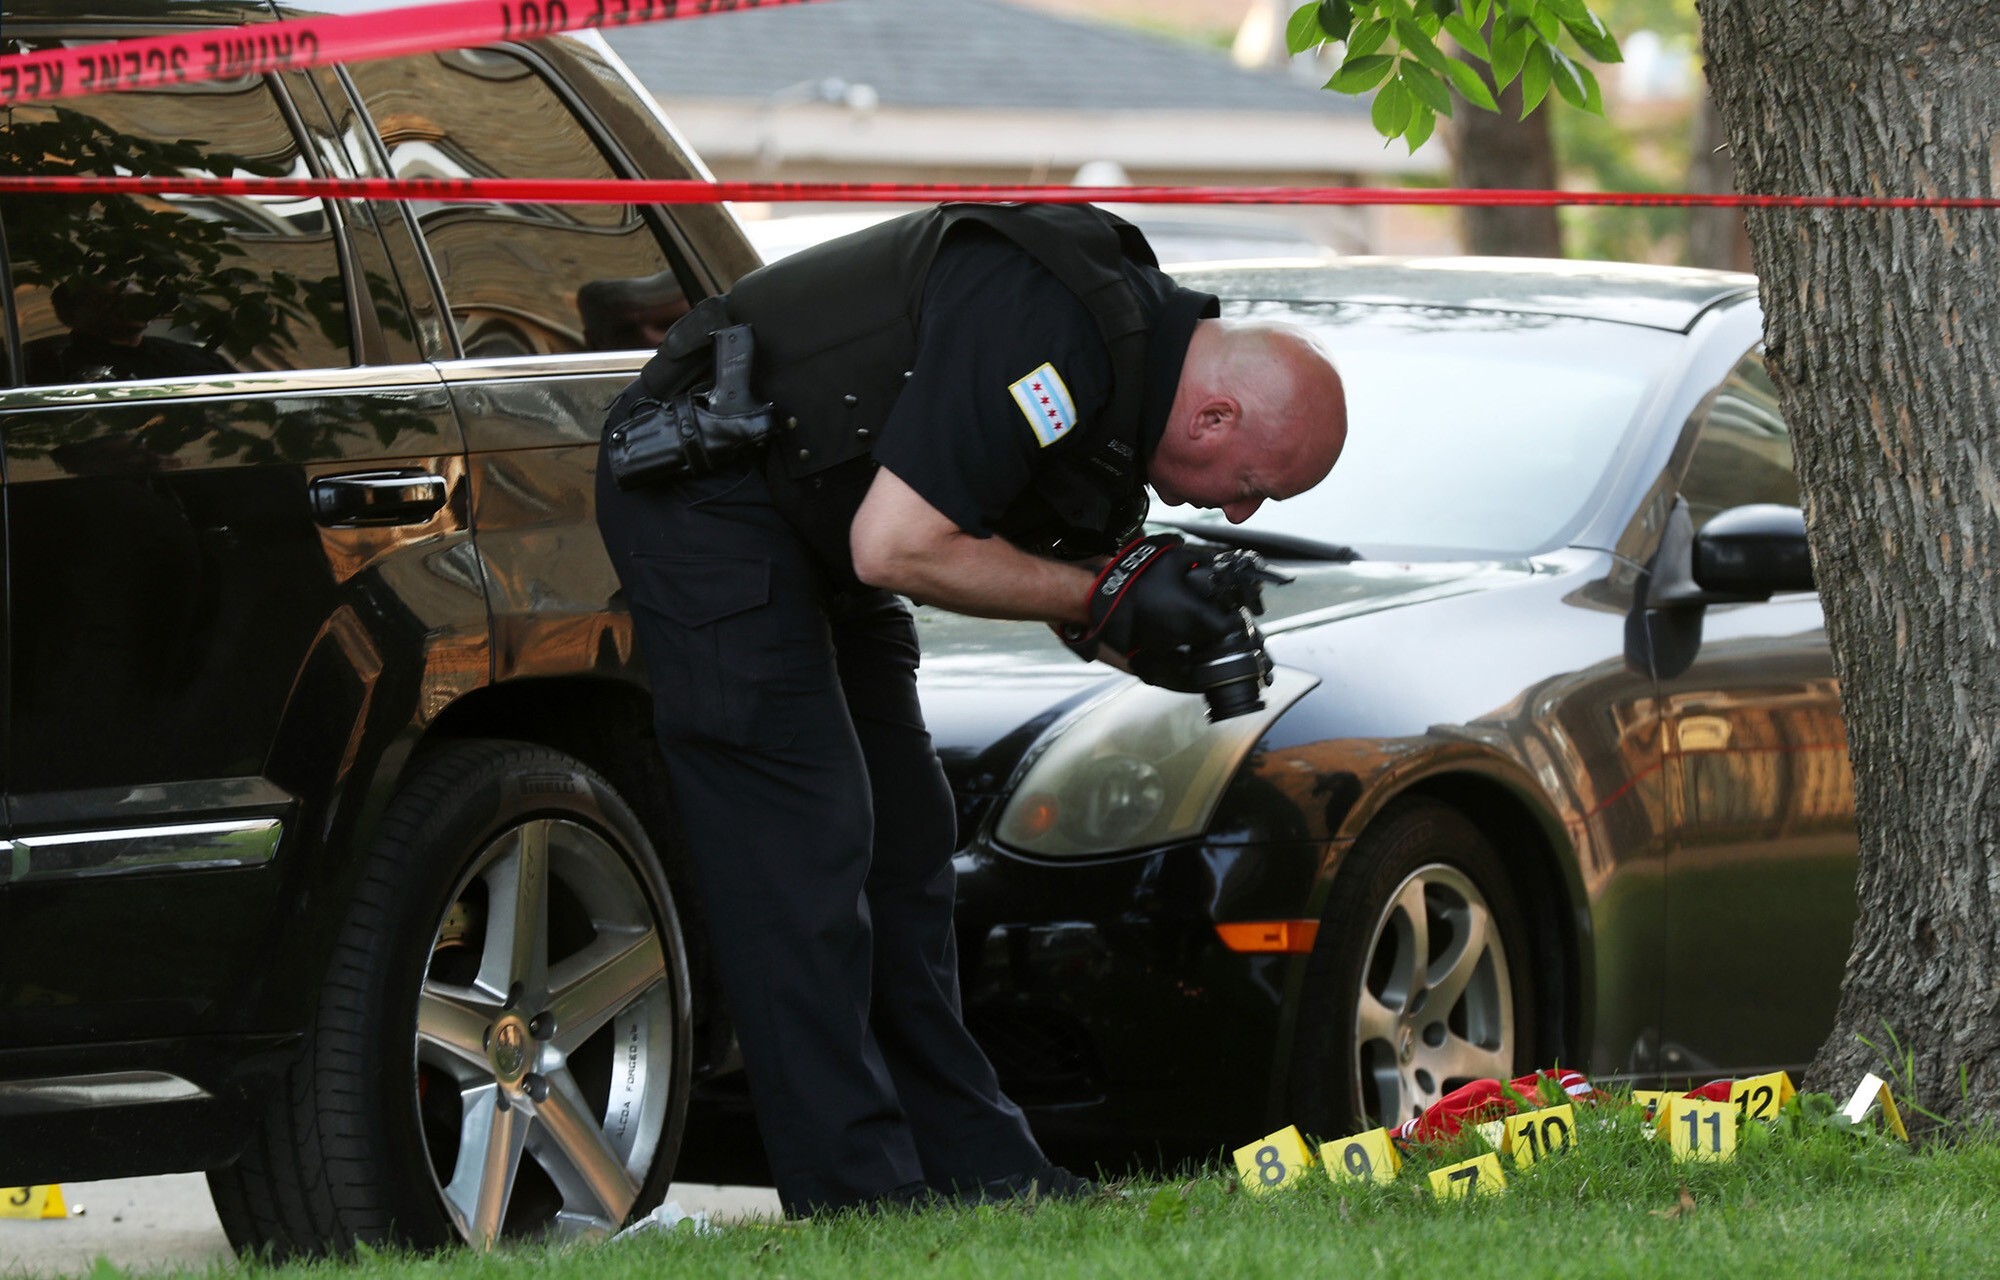 A police officer photographs bullet casings at the scene of a fatal shooting in Chicago. Photo: Chicago Tribune / TNS